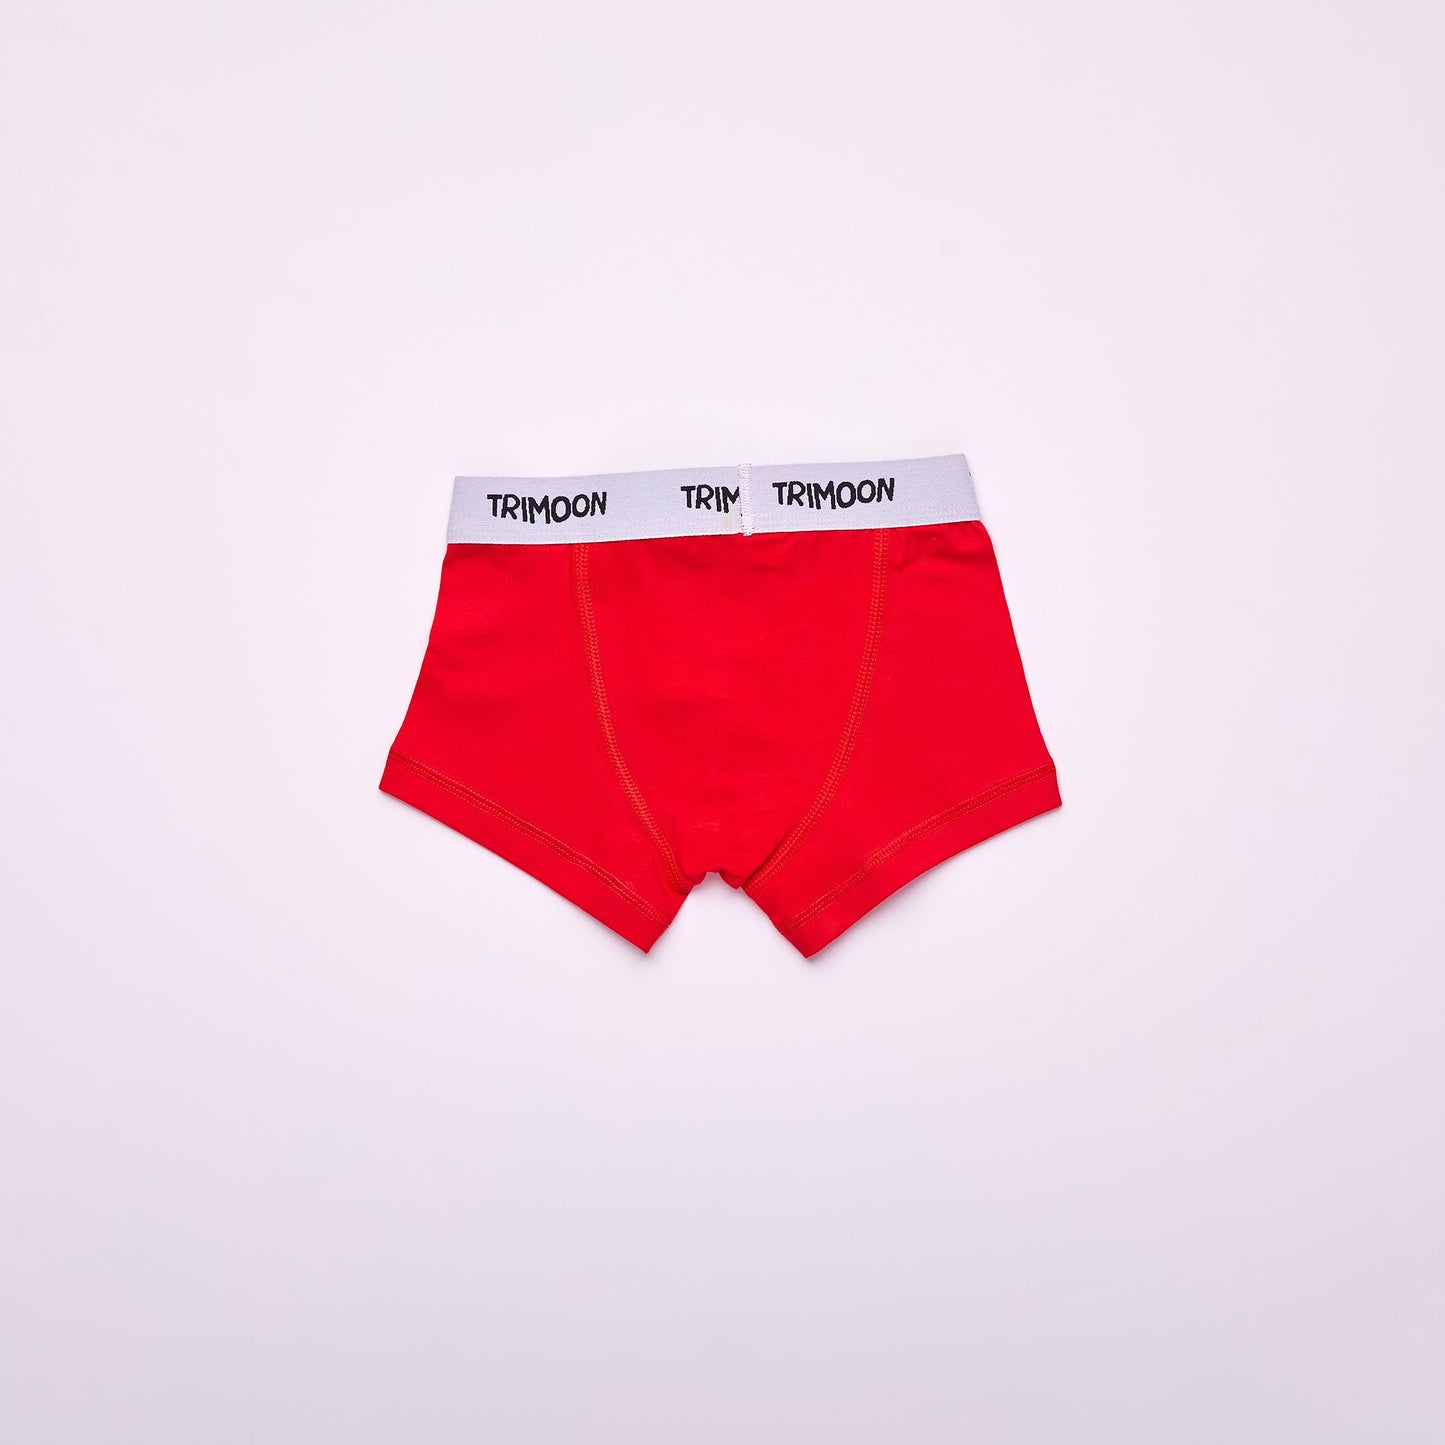 Trimoon Pack of 4 Brand New Boxers For Boys - Treo Howdi Moon - mymadstore.com